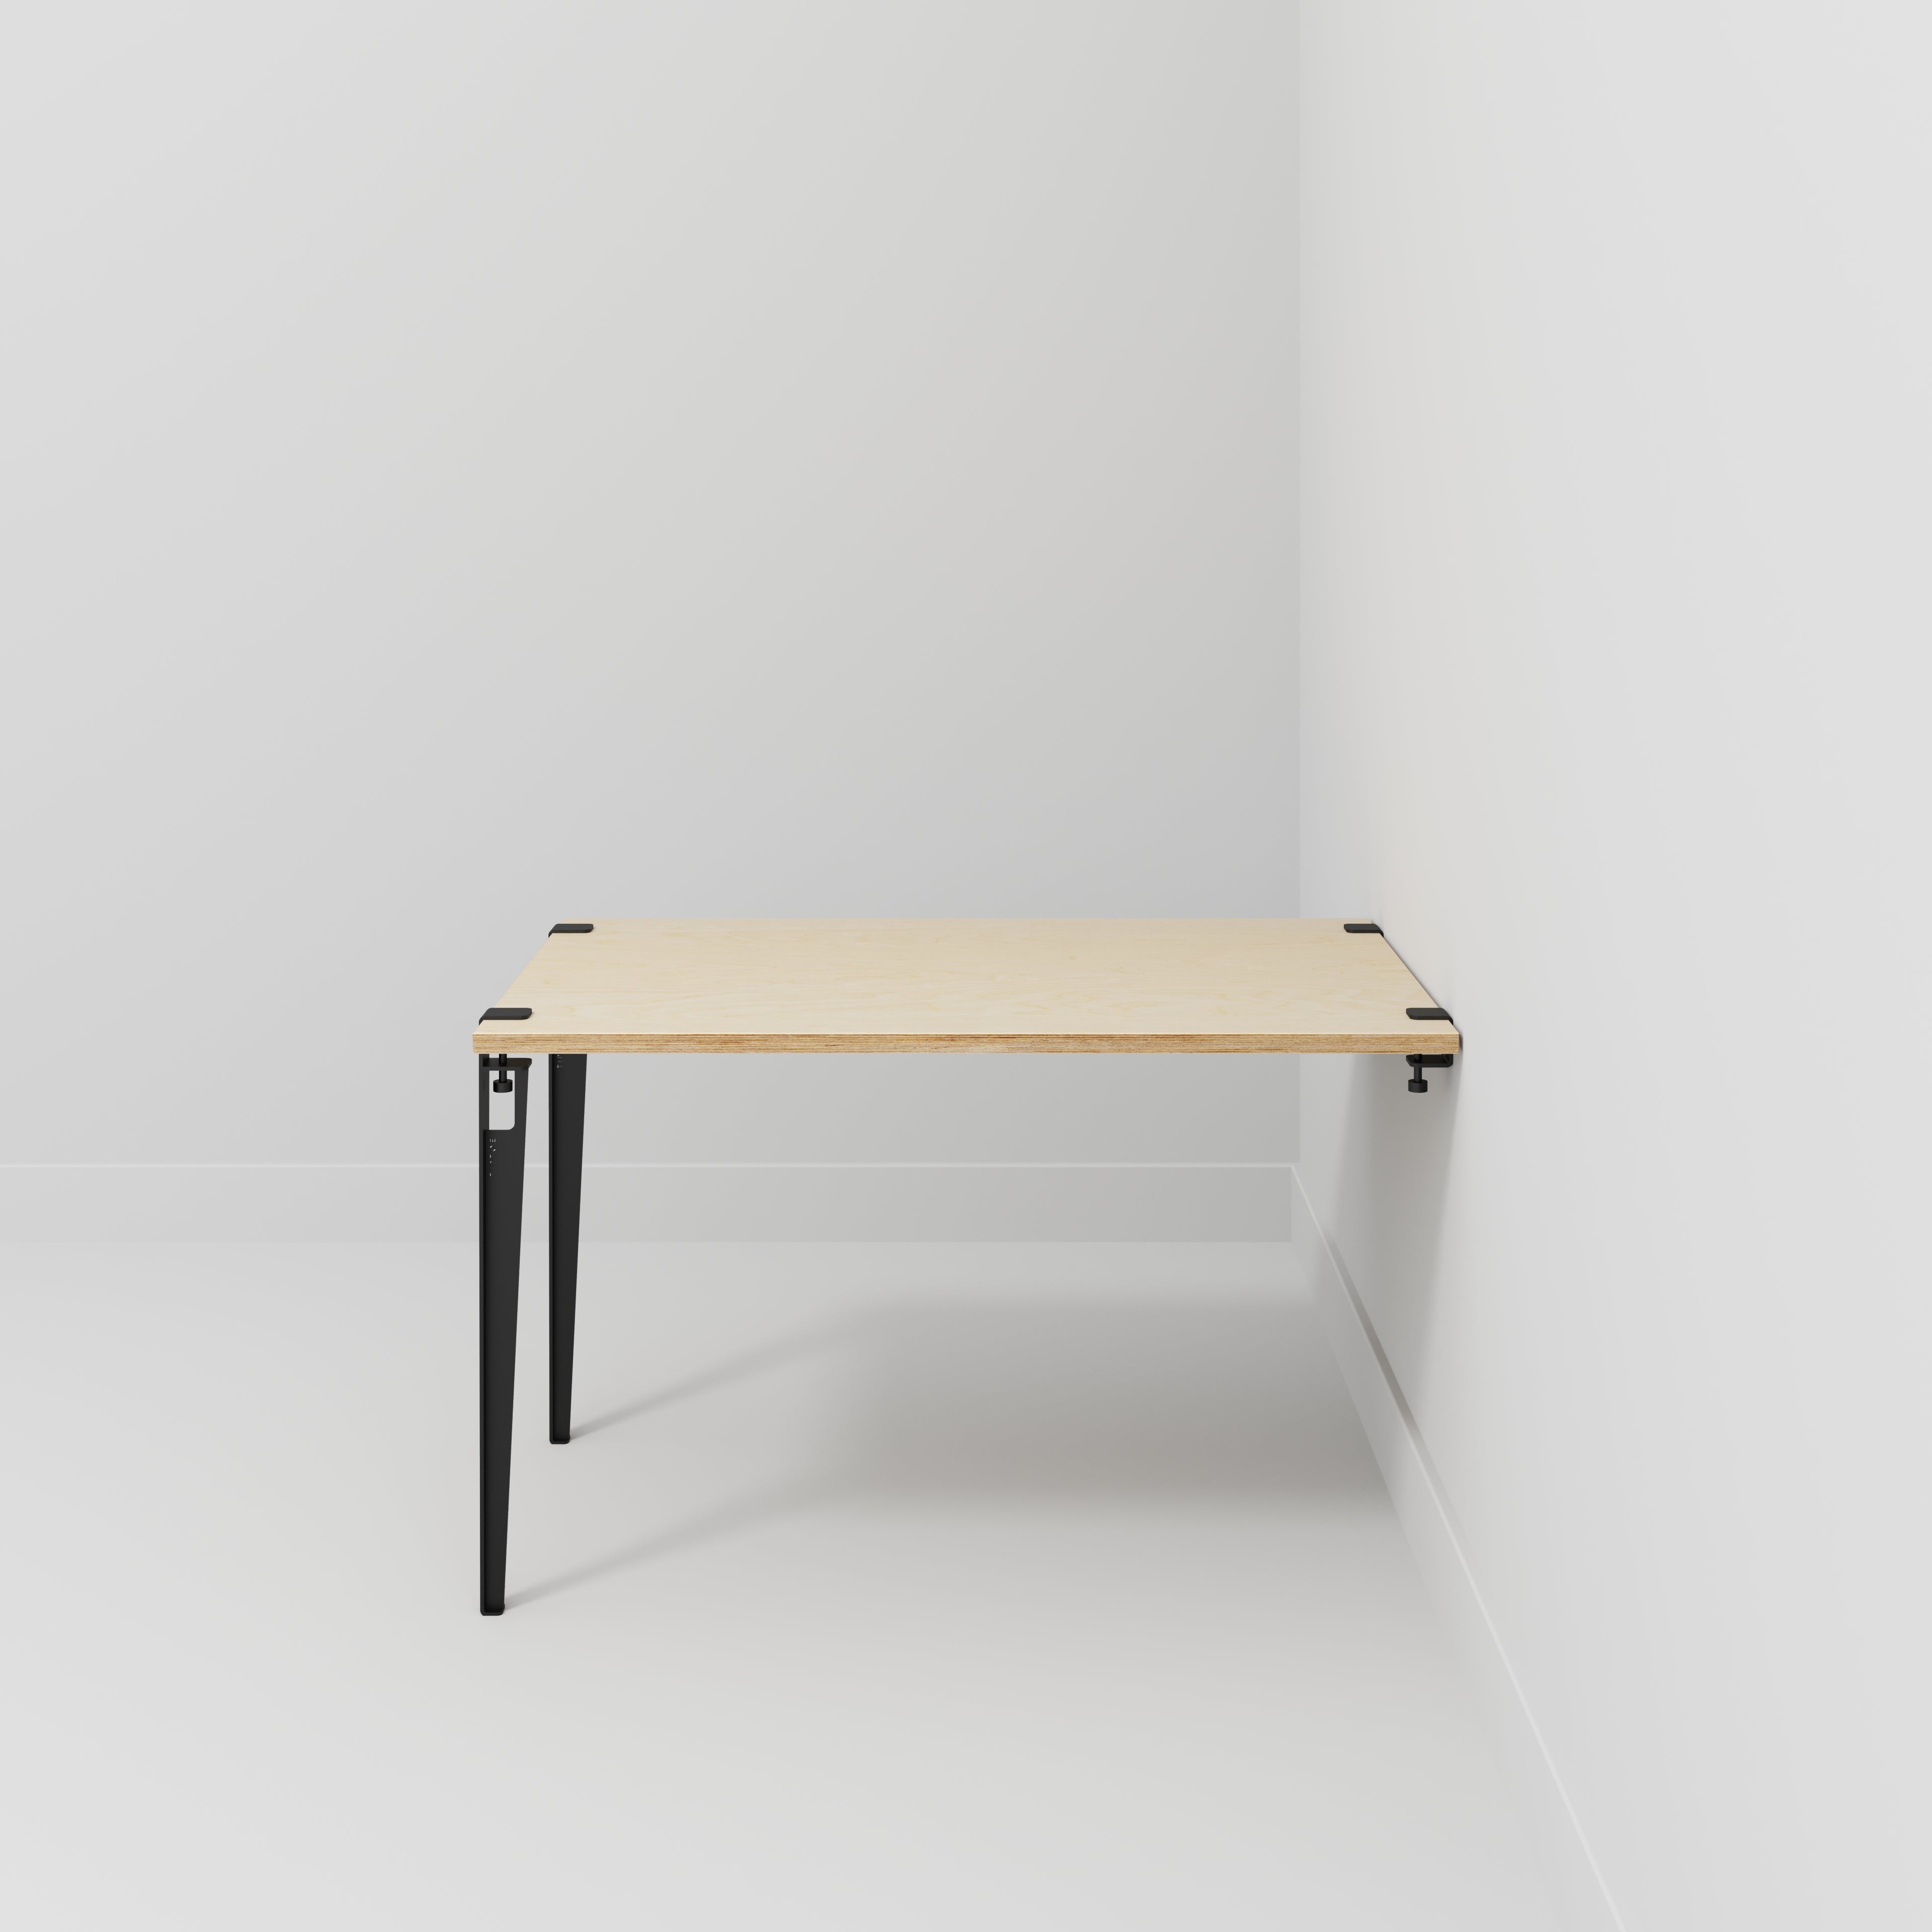 Custom Plywood Wall Table with Tiptoe Legs and Wall Brackets